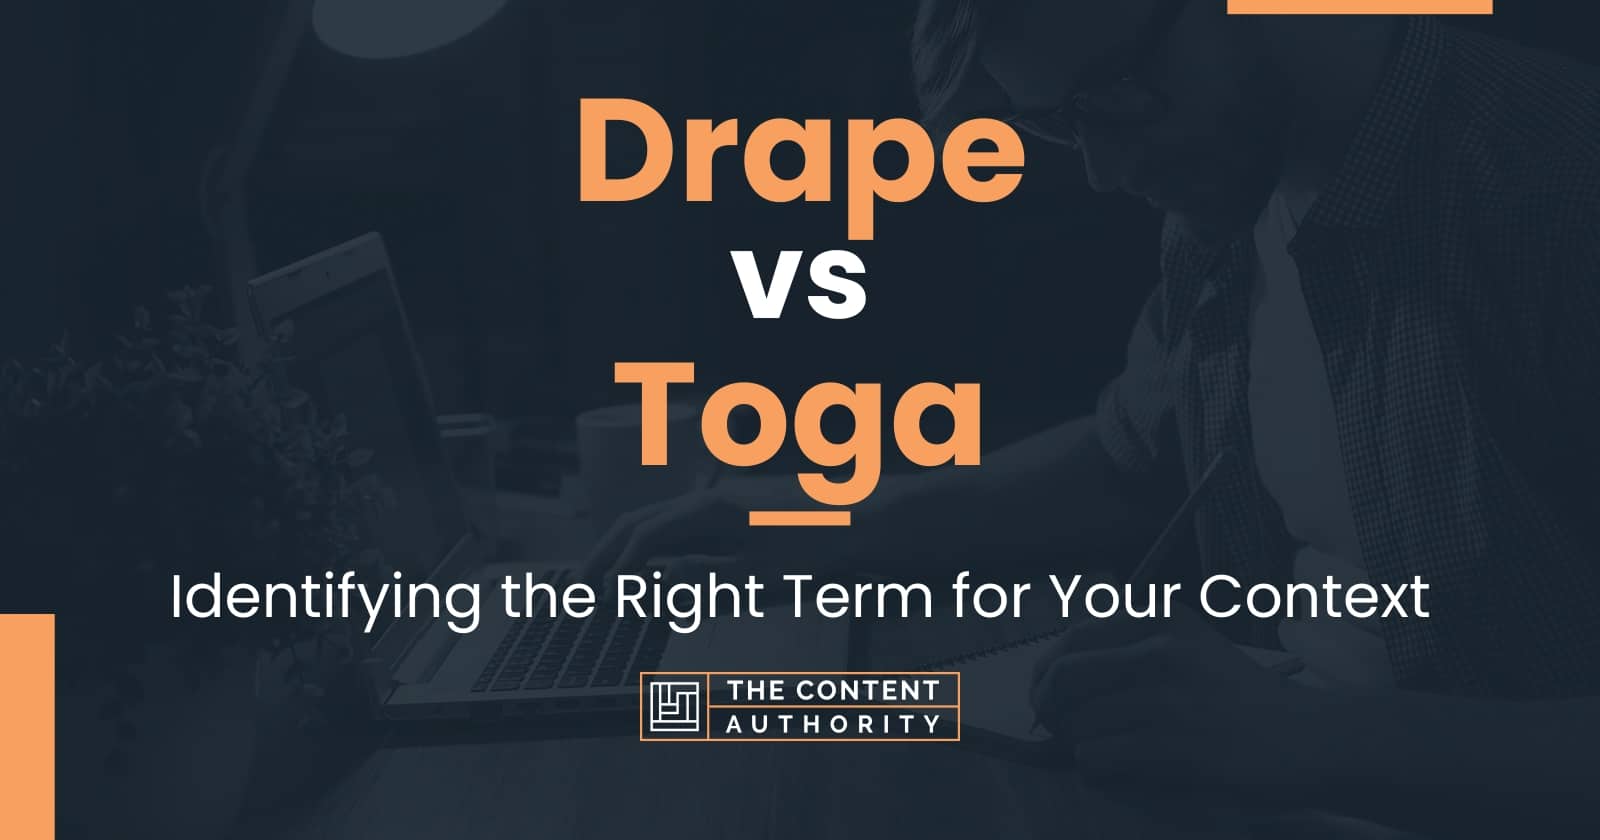 Drape vs Toga: Identifying the Right Term for Your Context